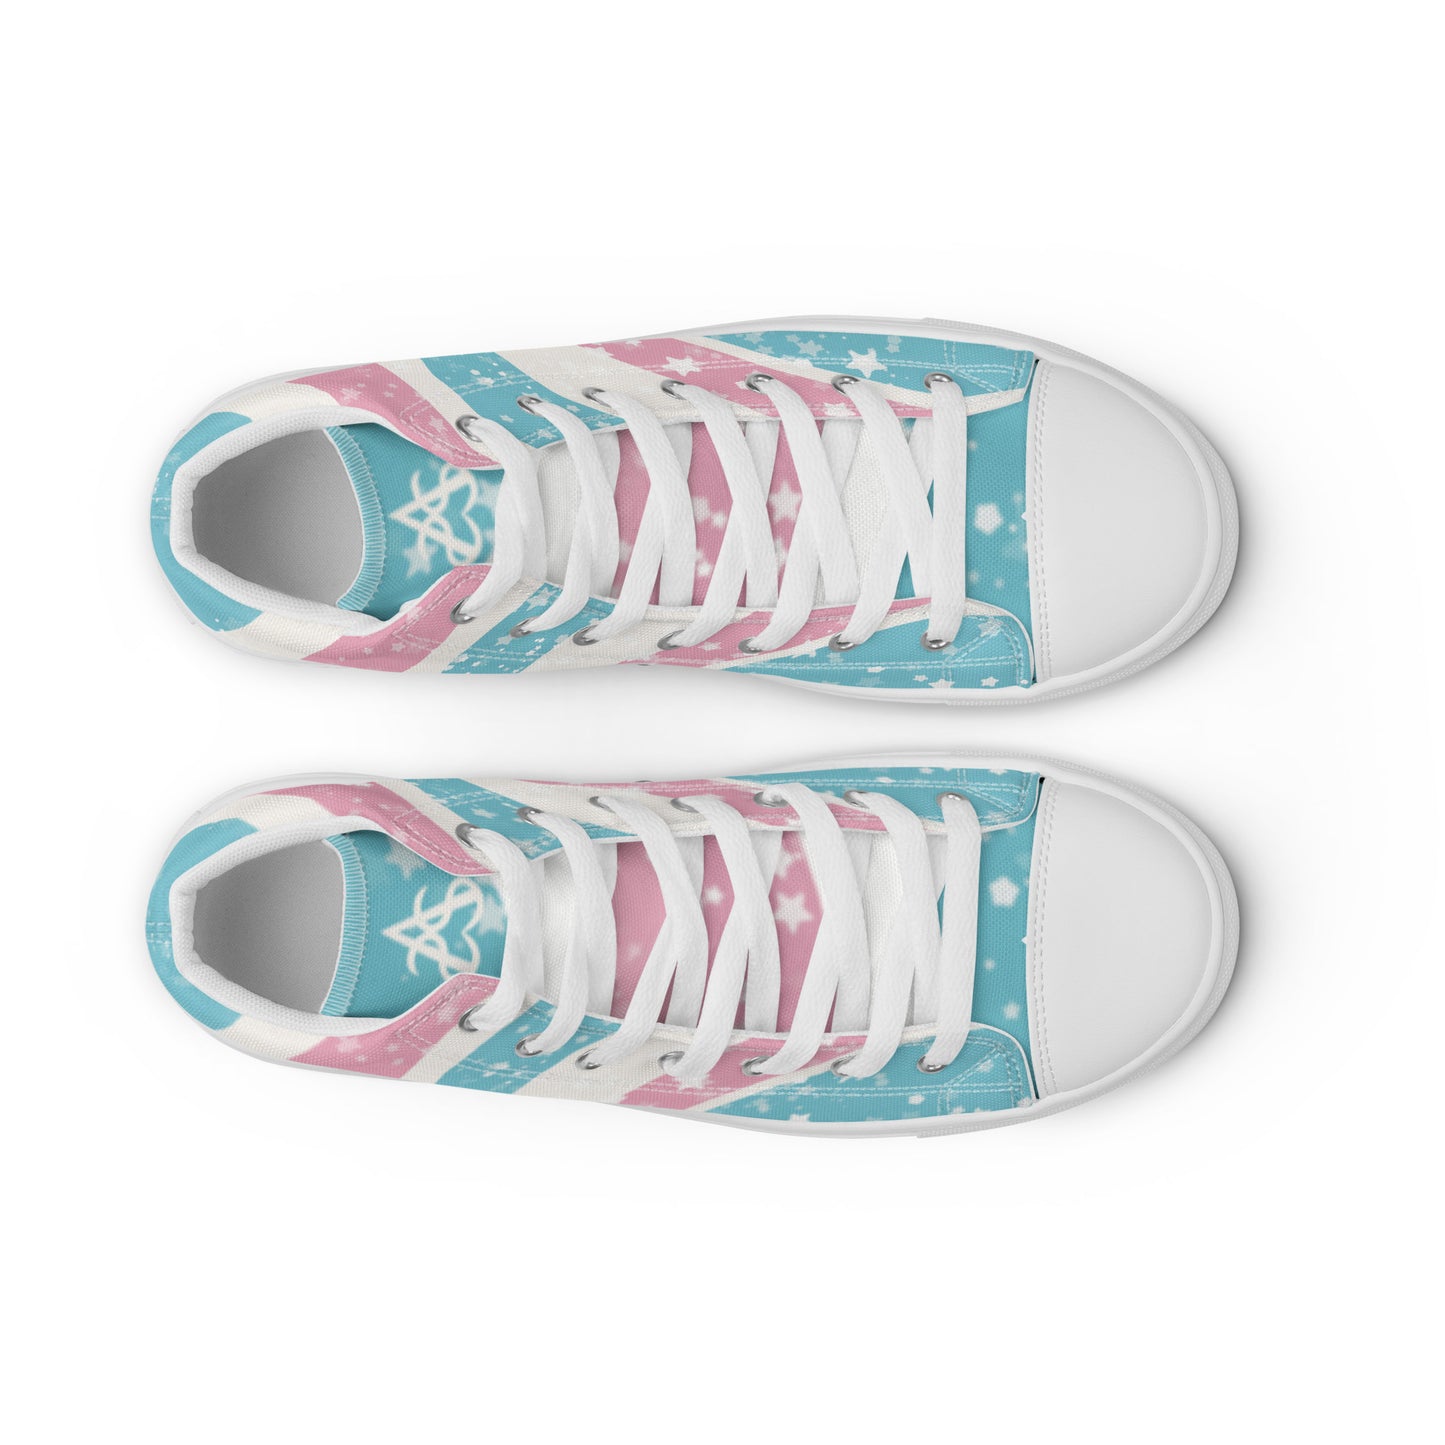 Top view: A pair of high top shoes have way lines starting from the heel and getting larger towards the laces in pink, white, and blue with white stars all over, white laces, and white details.